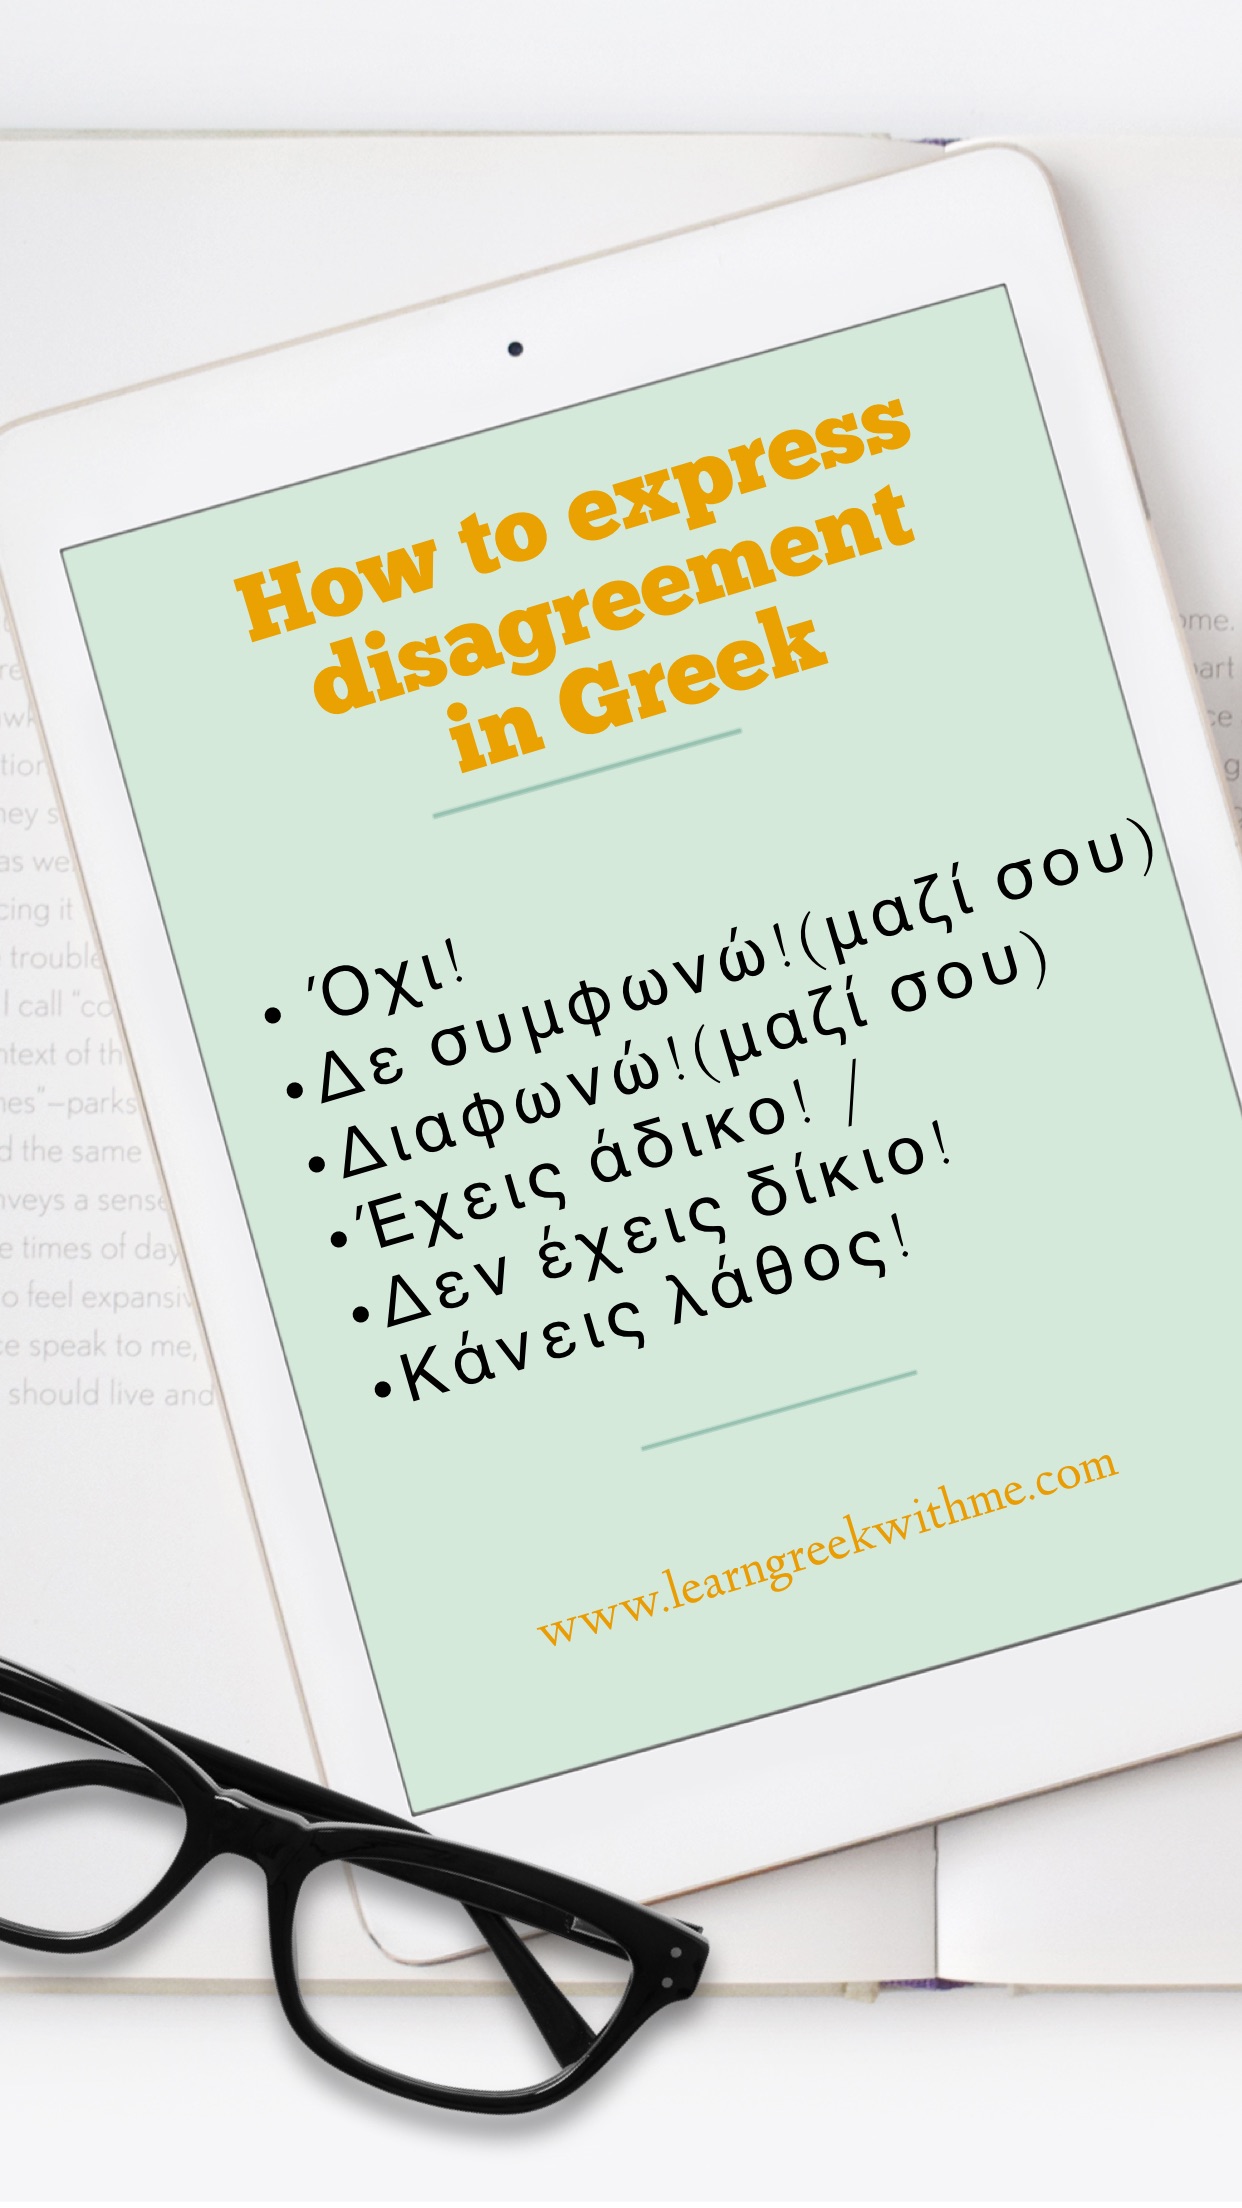 How to express disagreement in Greek